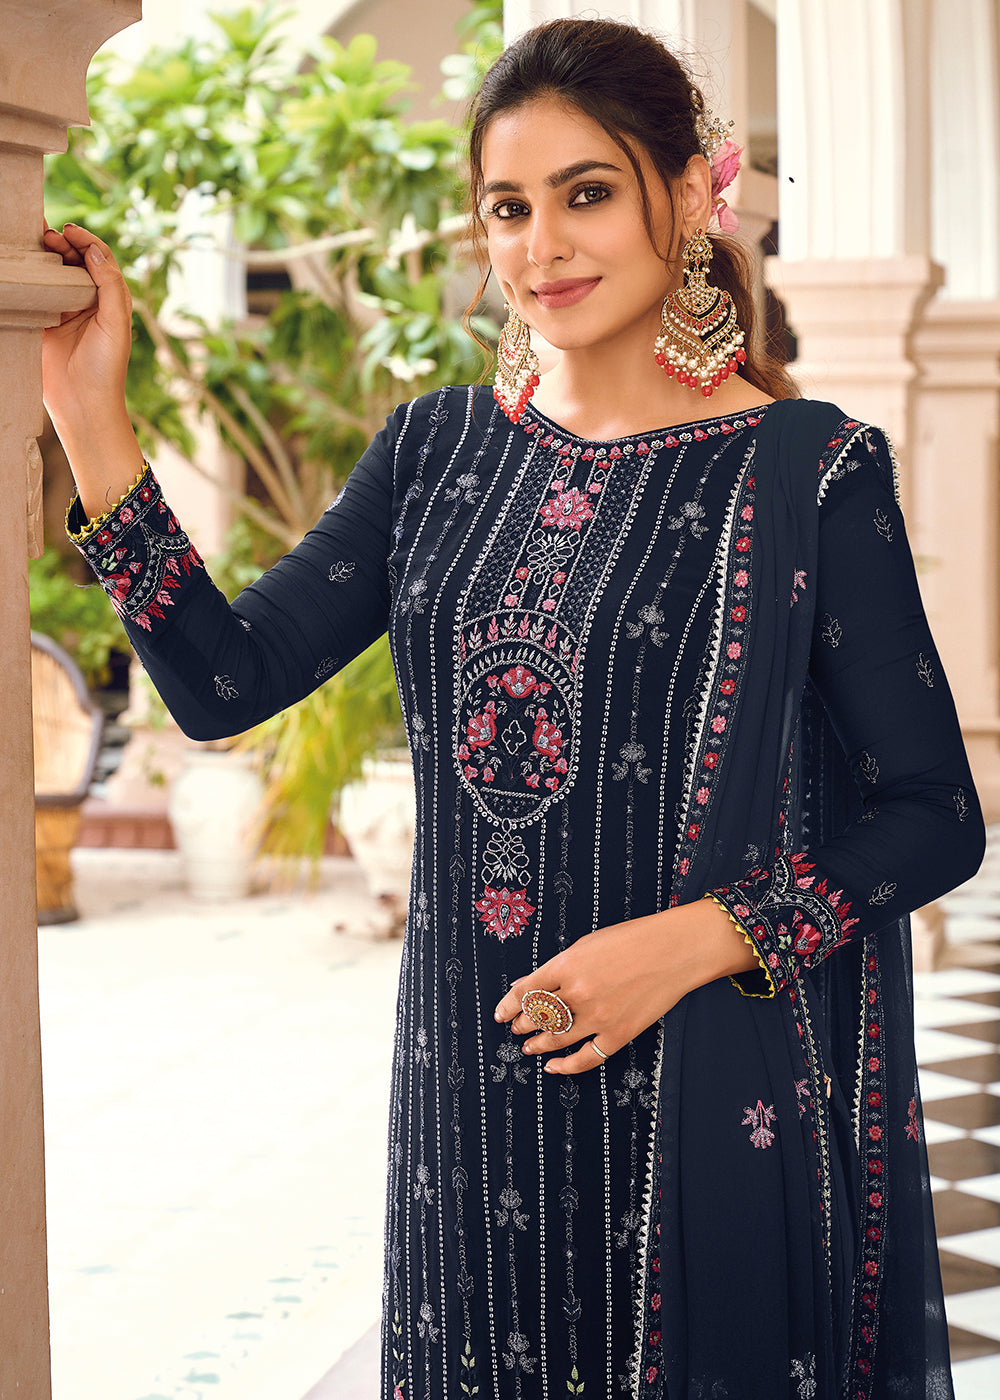 Buy Now Navy Blue Embroidered Georgette Ceremonial Salwar Suit Online in USA, UK, Canada & Worldwide at Empress Clothing.